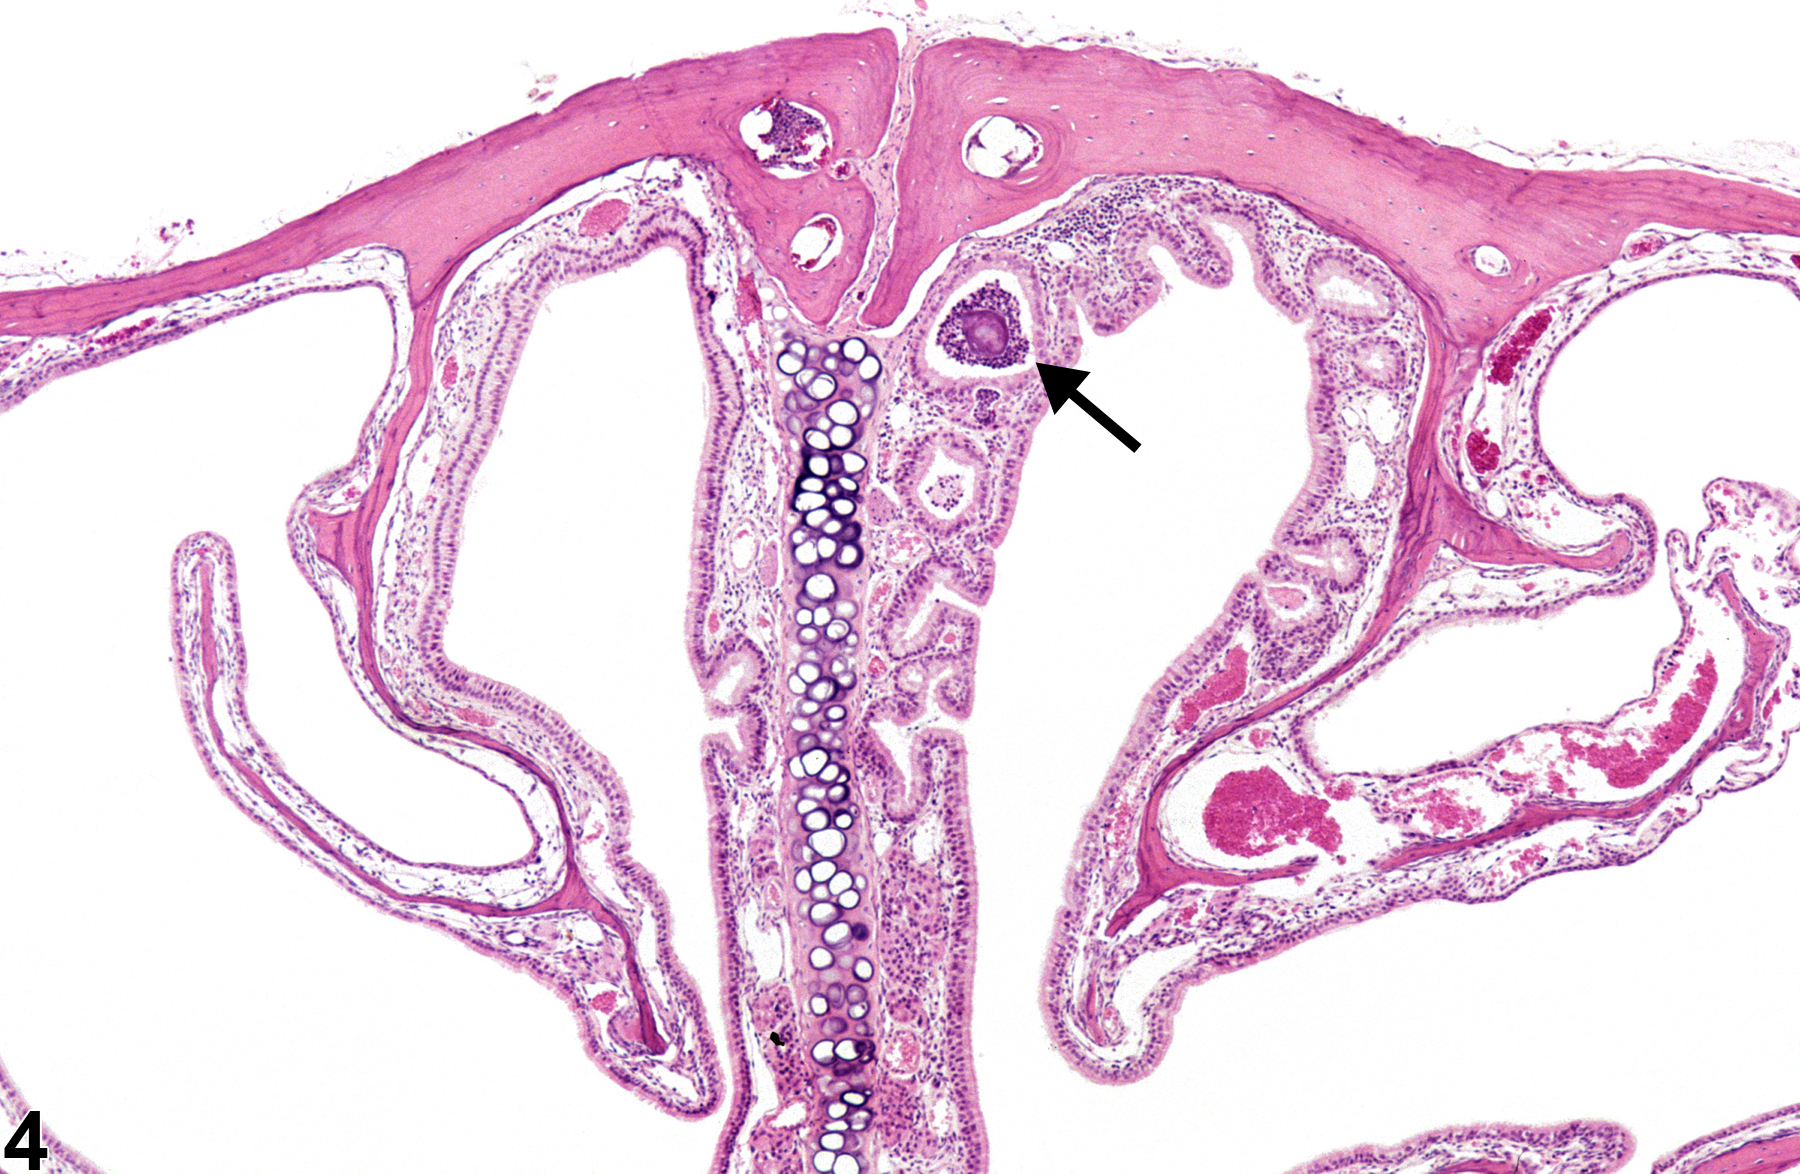 Image of hyperplasia in the nose, respiratory epithelium from a male B6C3F1/N mouse in a chronic study